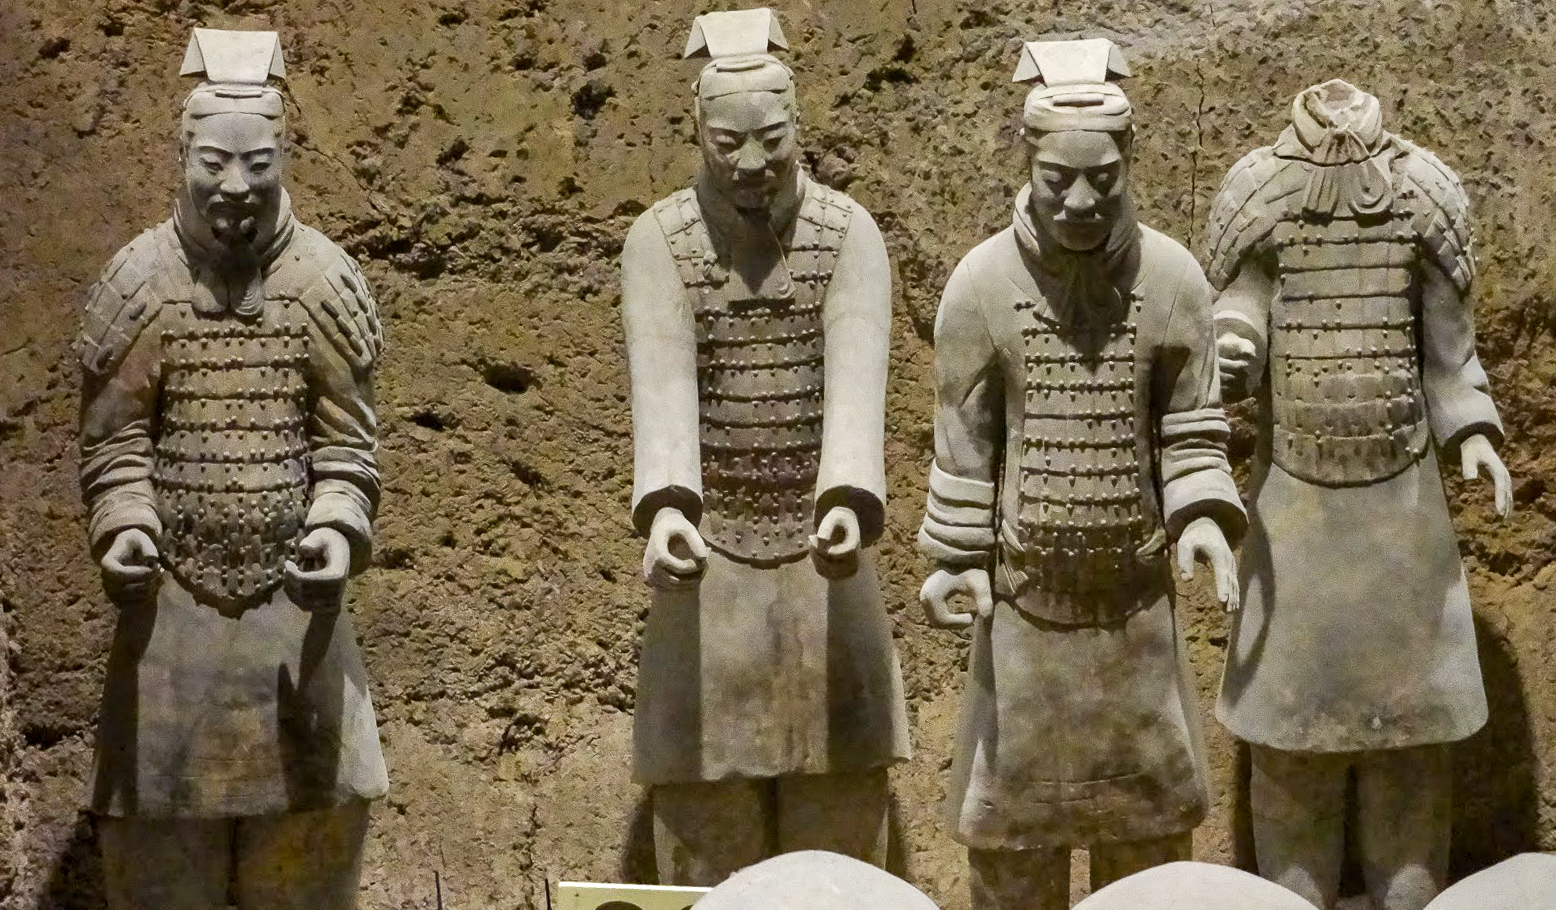 A close up of 4 Terracotta Warriors of the Terracotta Army in Pit 3 at Emperor Qinshihuang's Mausoleum, Xian, China